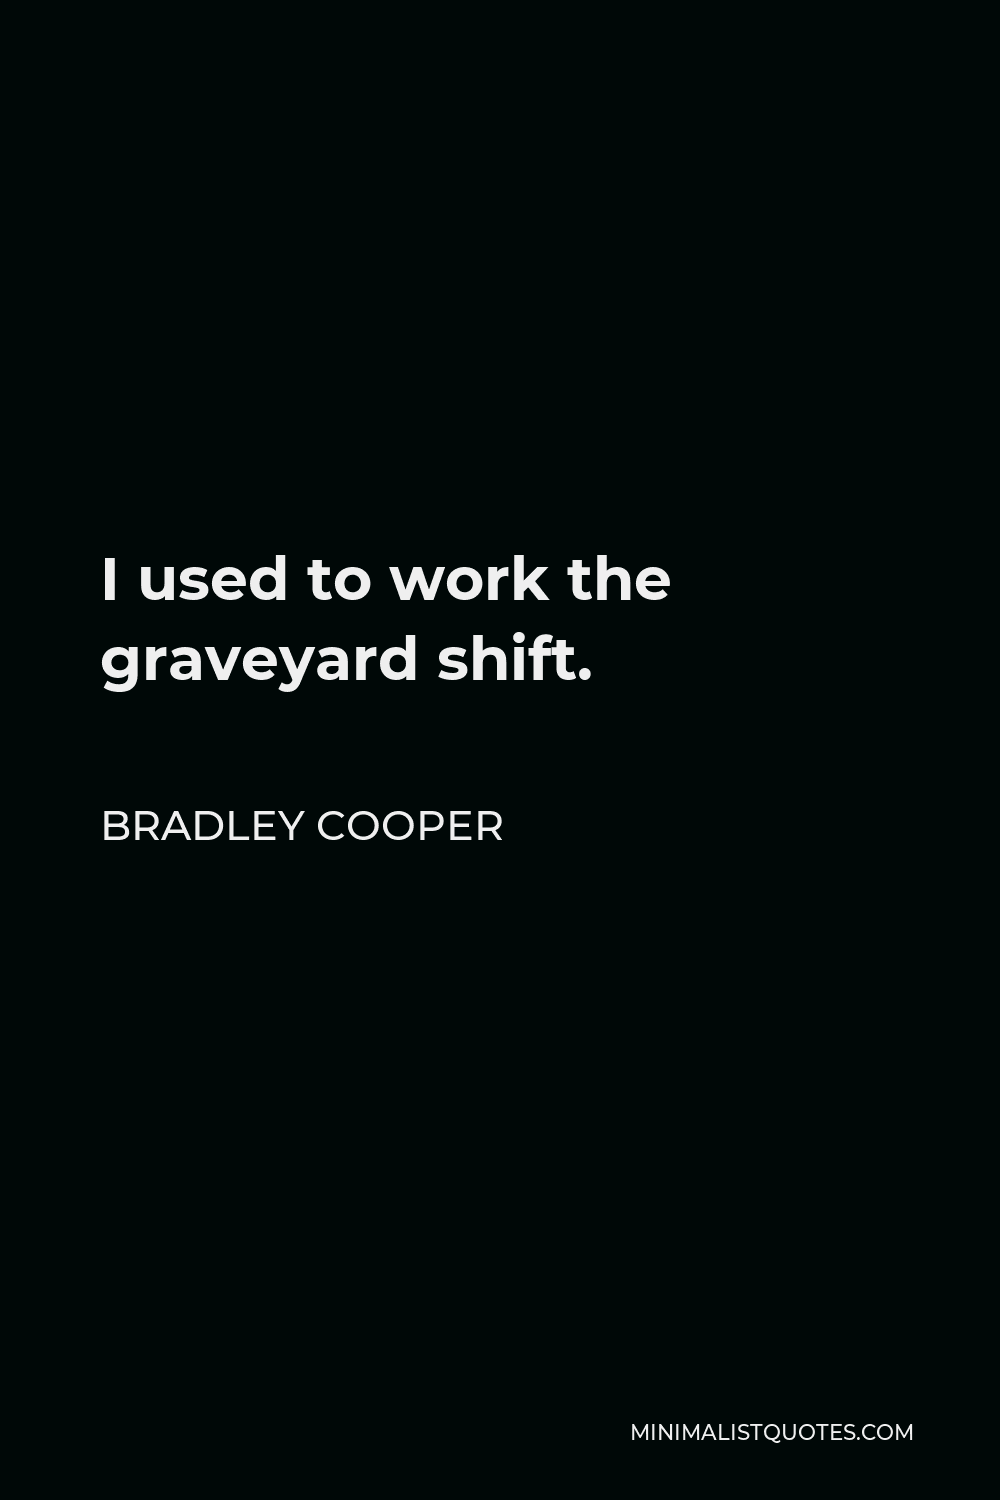 Bradley Cooper Quote - I used to work the graveyard shift.